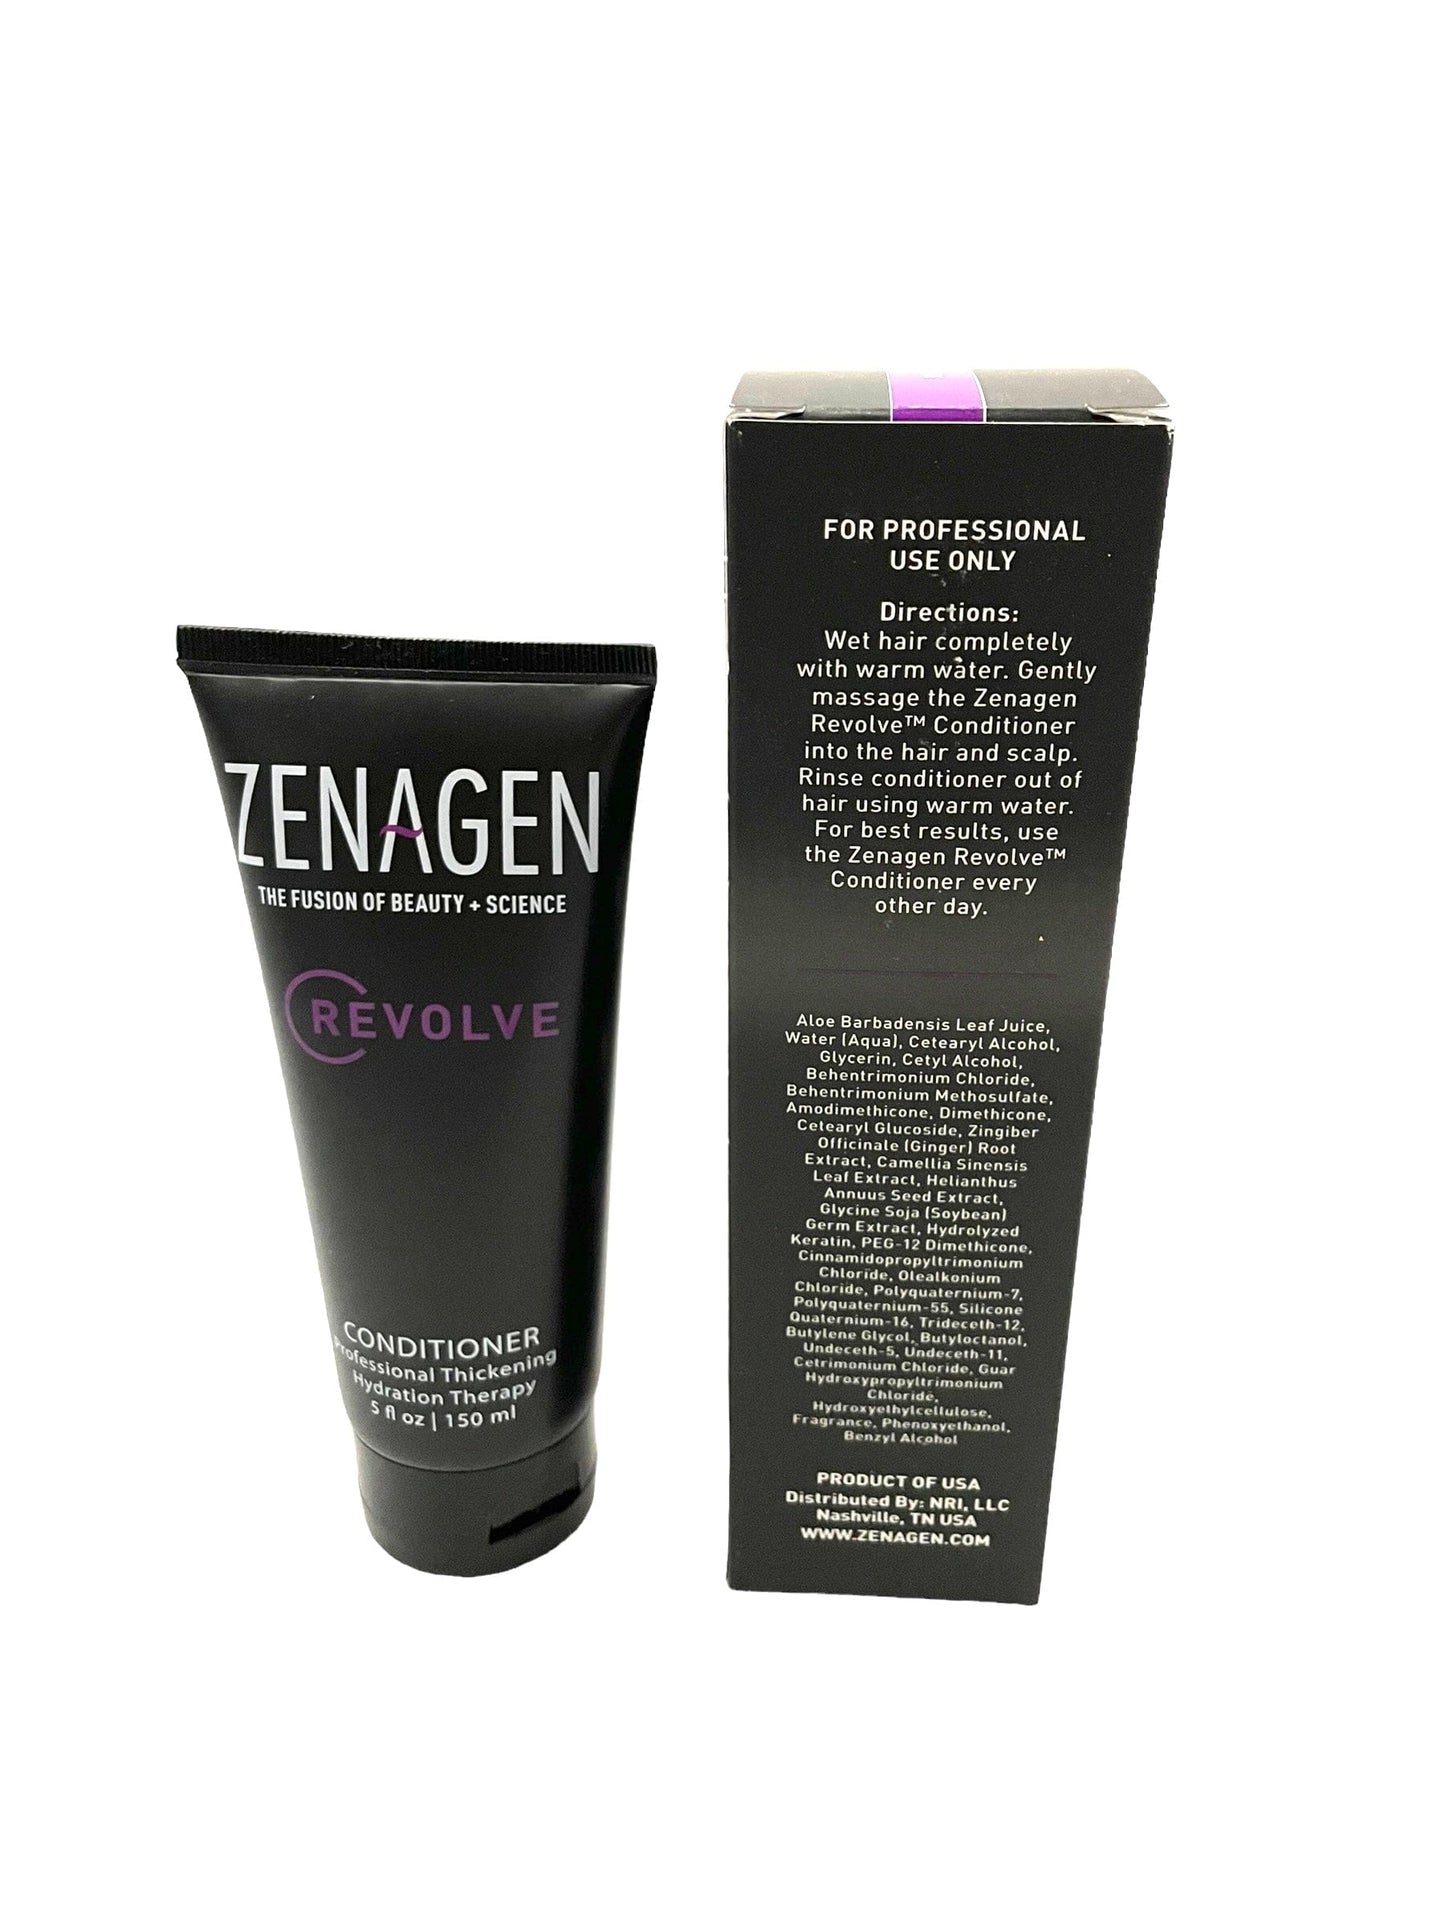 Hair Loss Conditioner Zenagen Revolve Professional Thickening Hydration Therapy 5 oz Hair Loss Conditioner